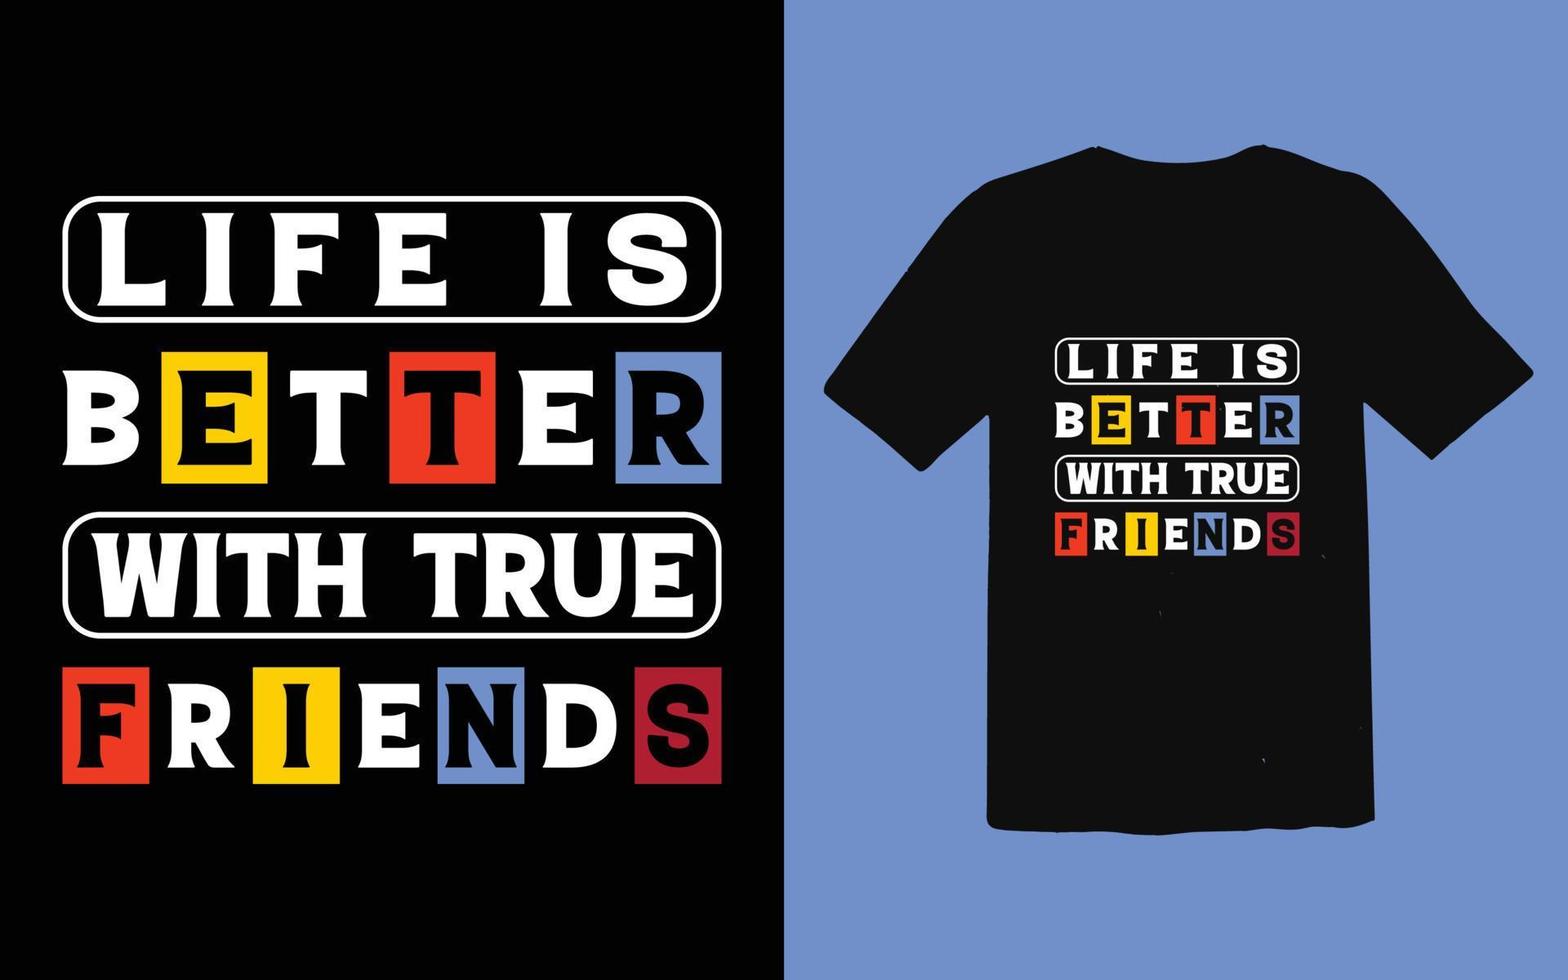 Life is better with friends t-shirt vector